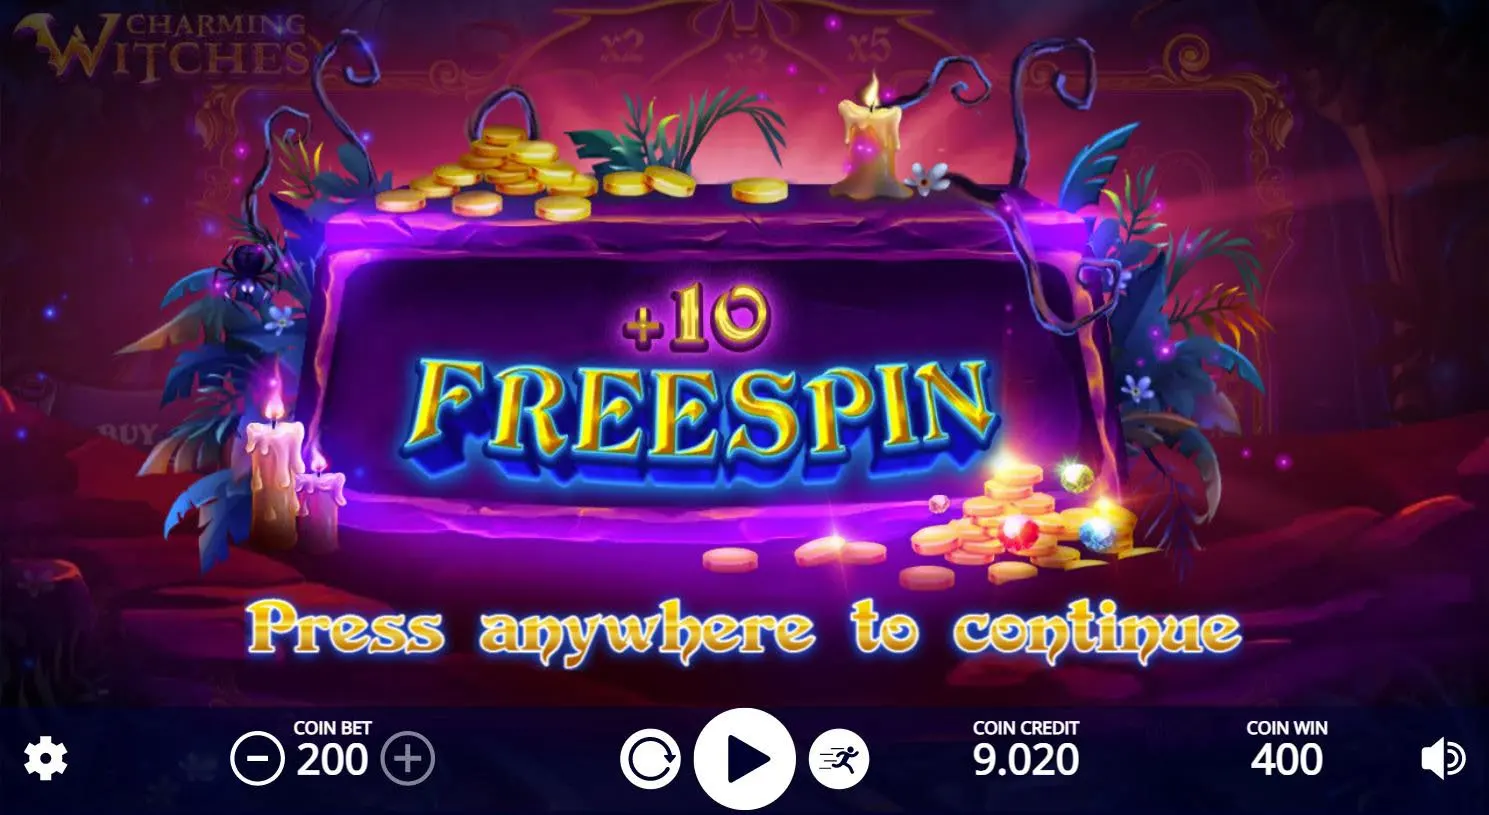 Charming Witches Free Spins